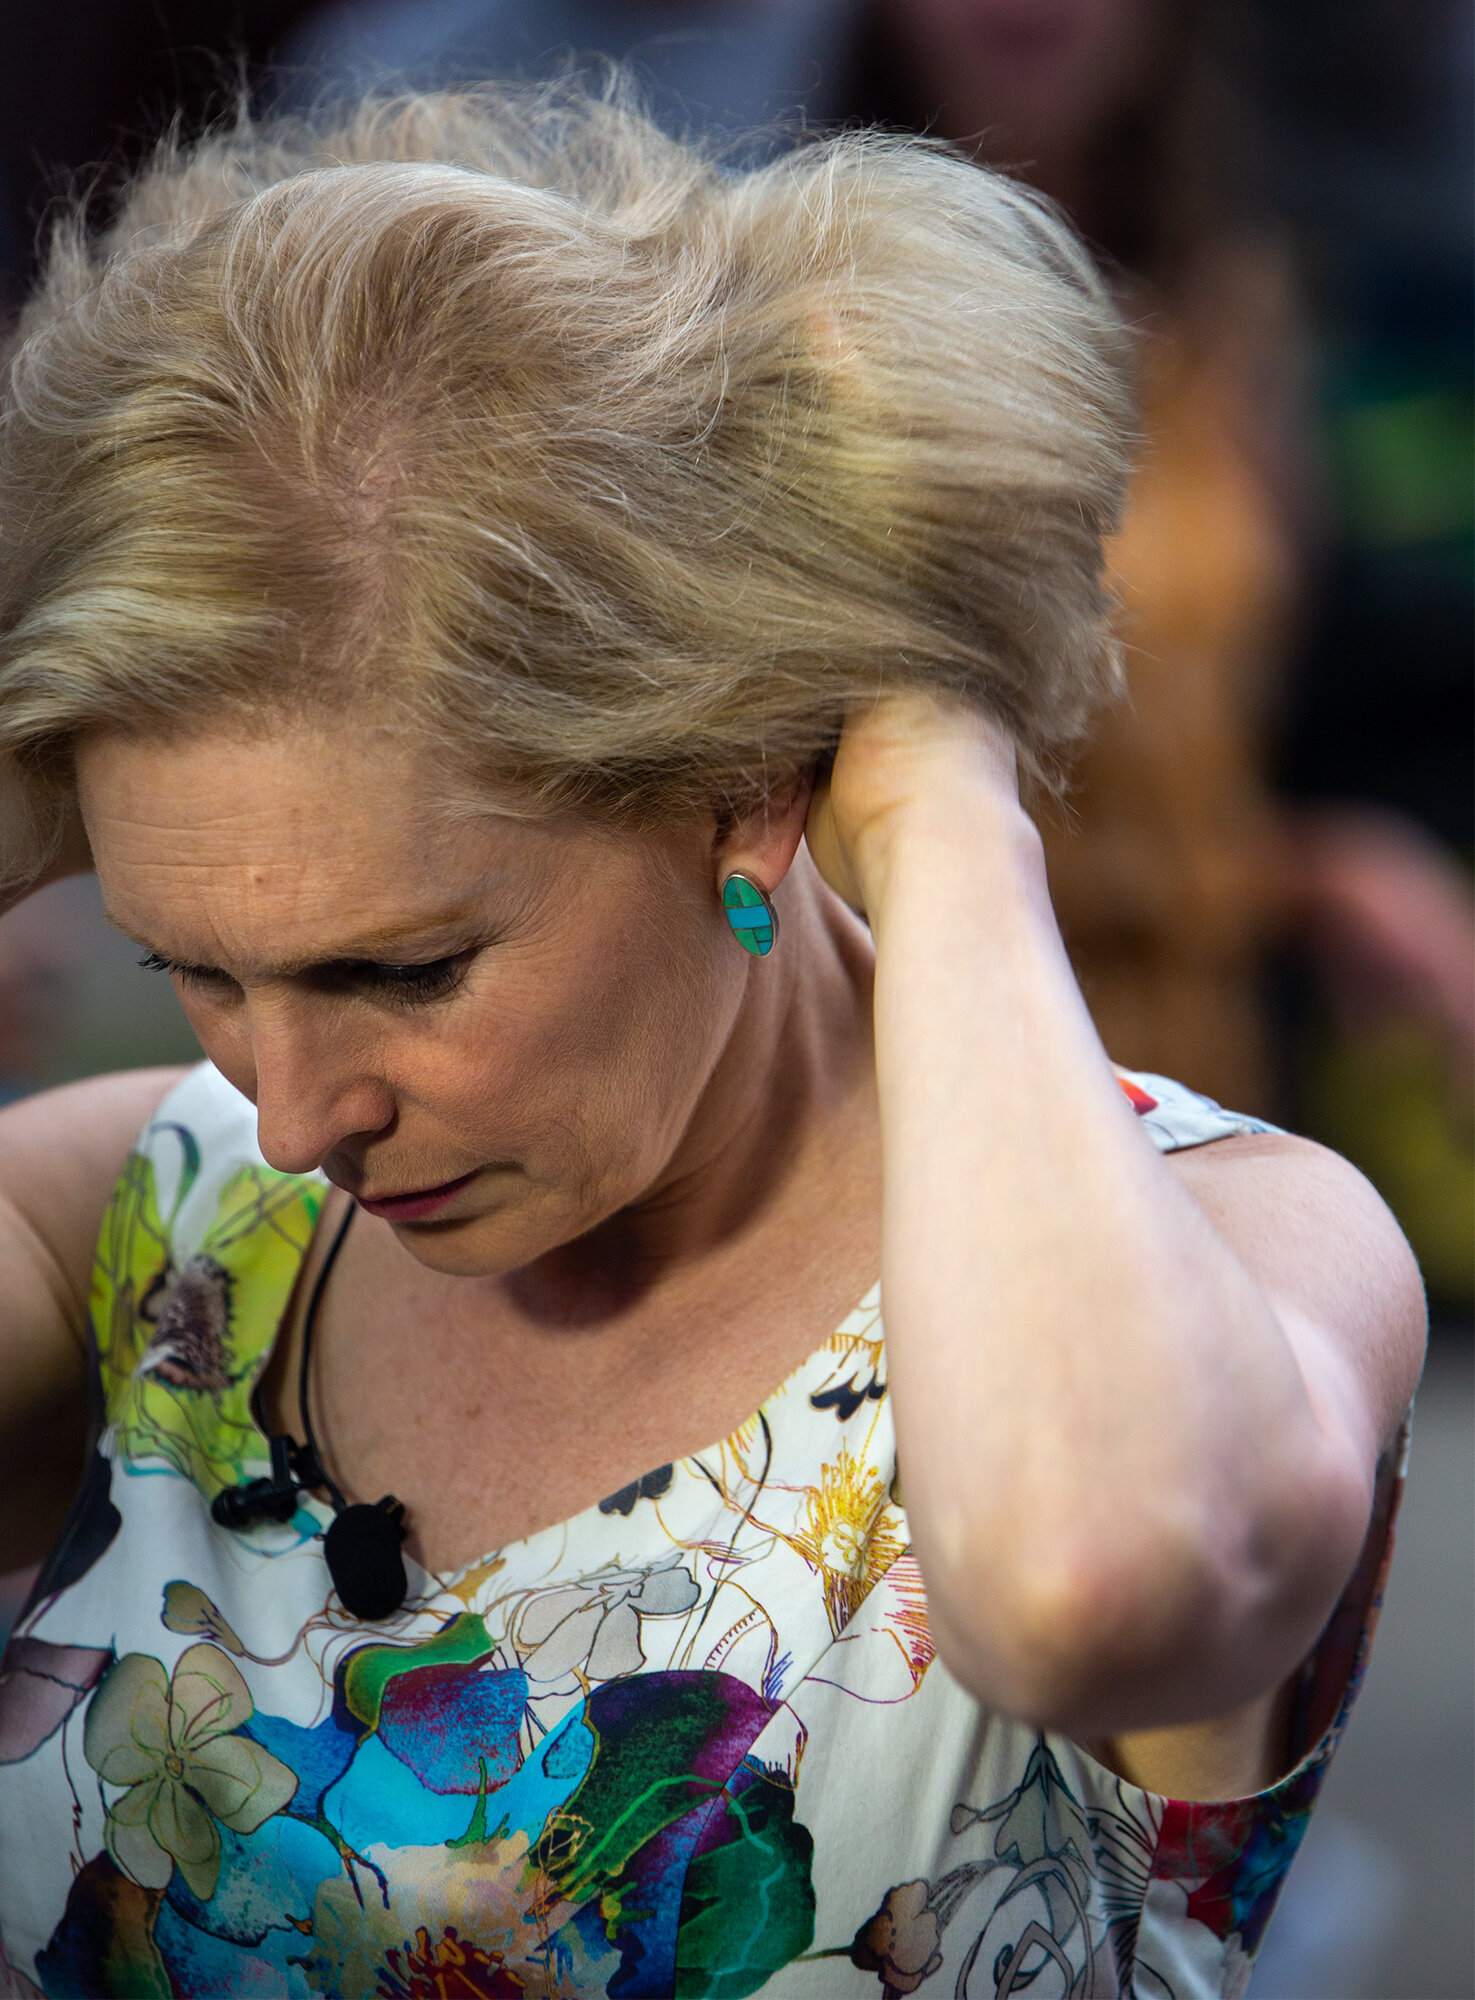  Sen. Kirsten Gillibrand prepares for an interview at the Iowa State Fair on August 10, 2019 in Des Moines, Iowa. (For Buzzfeed News) 